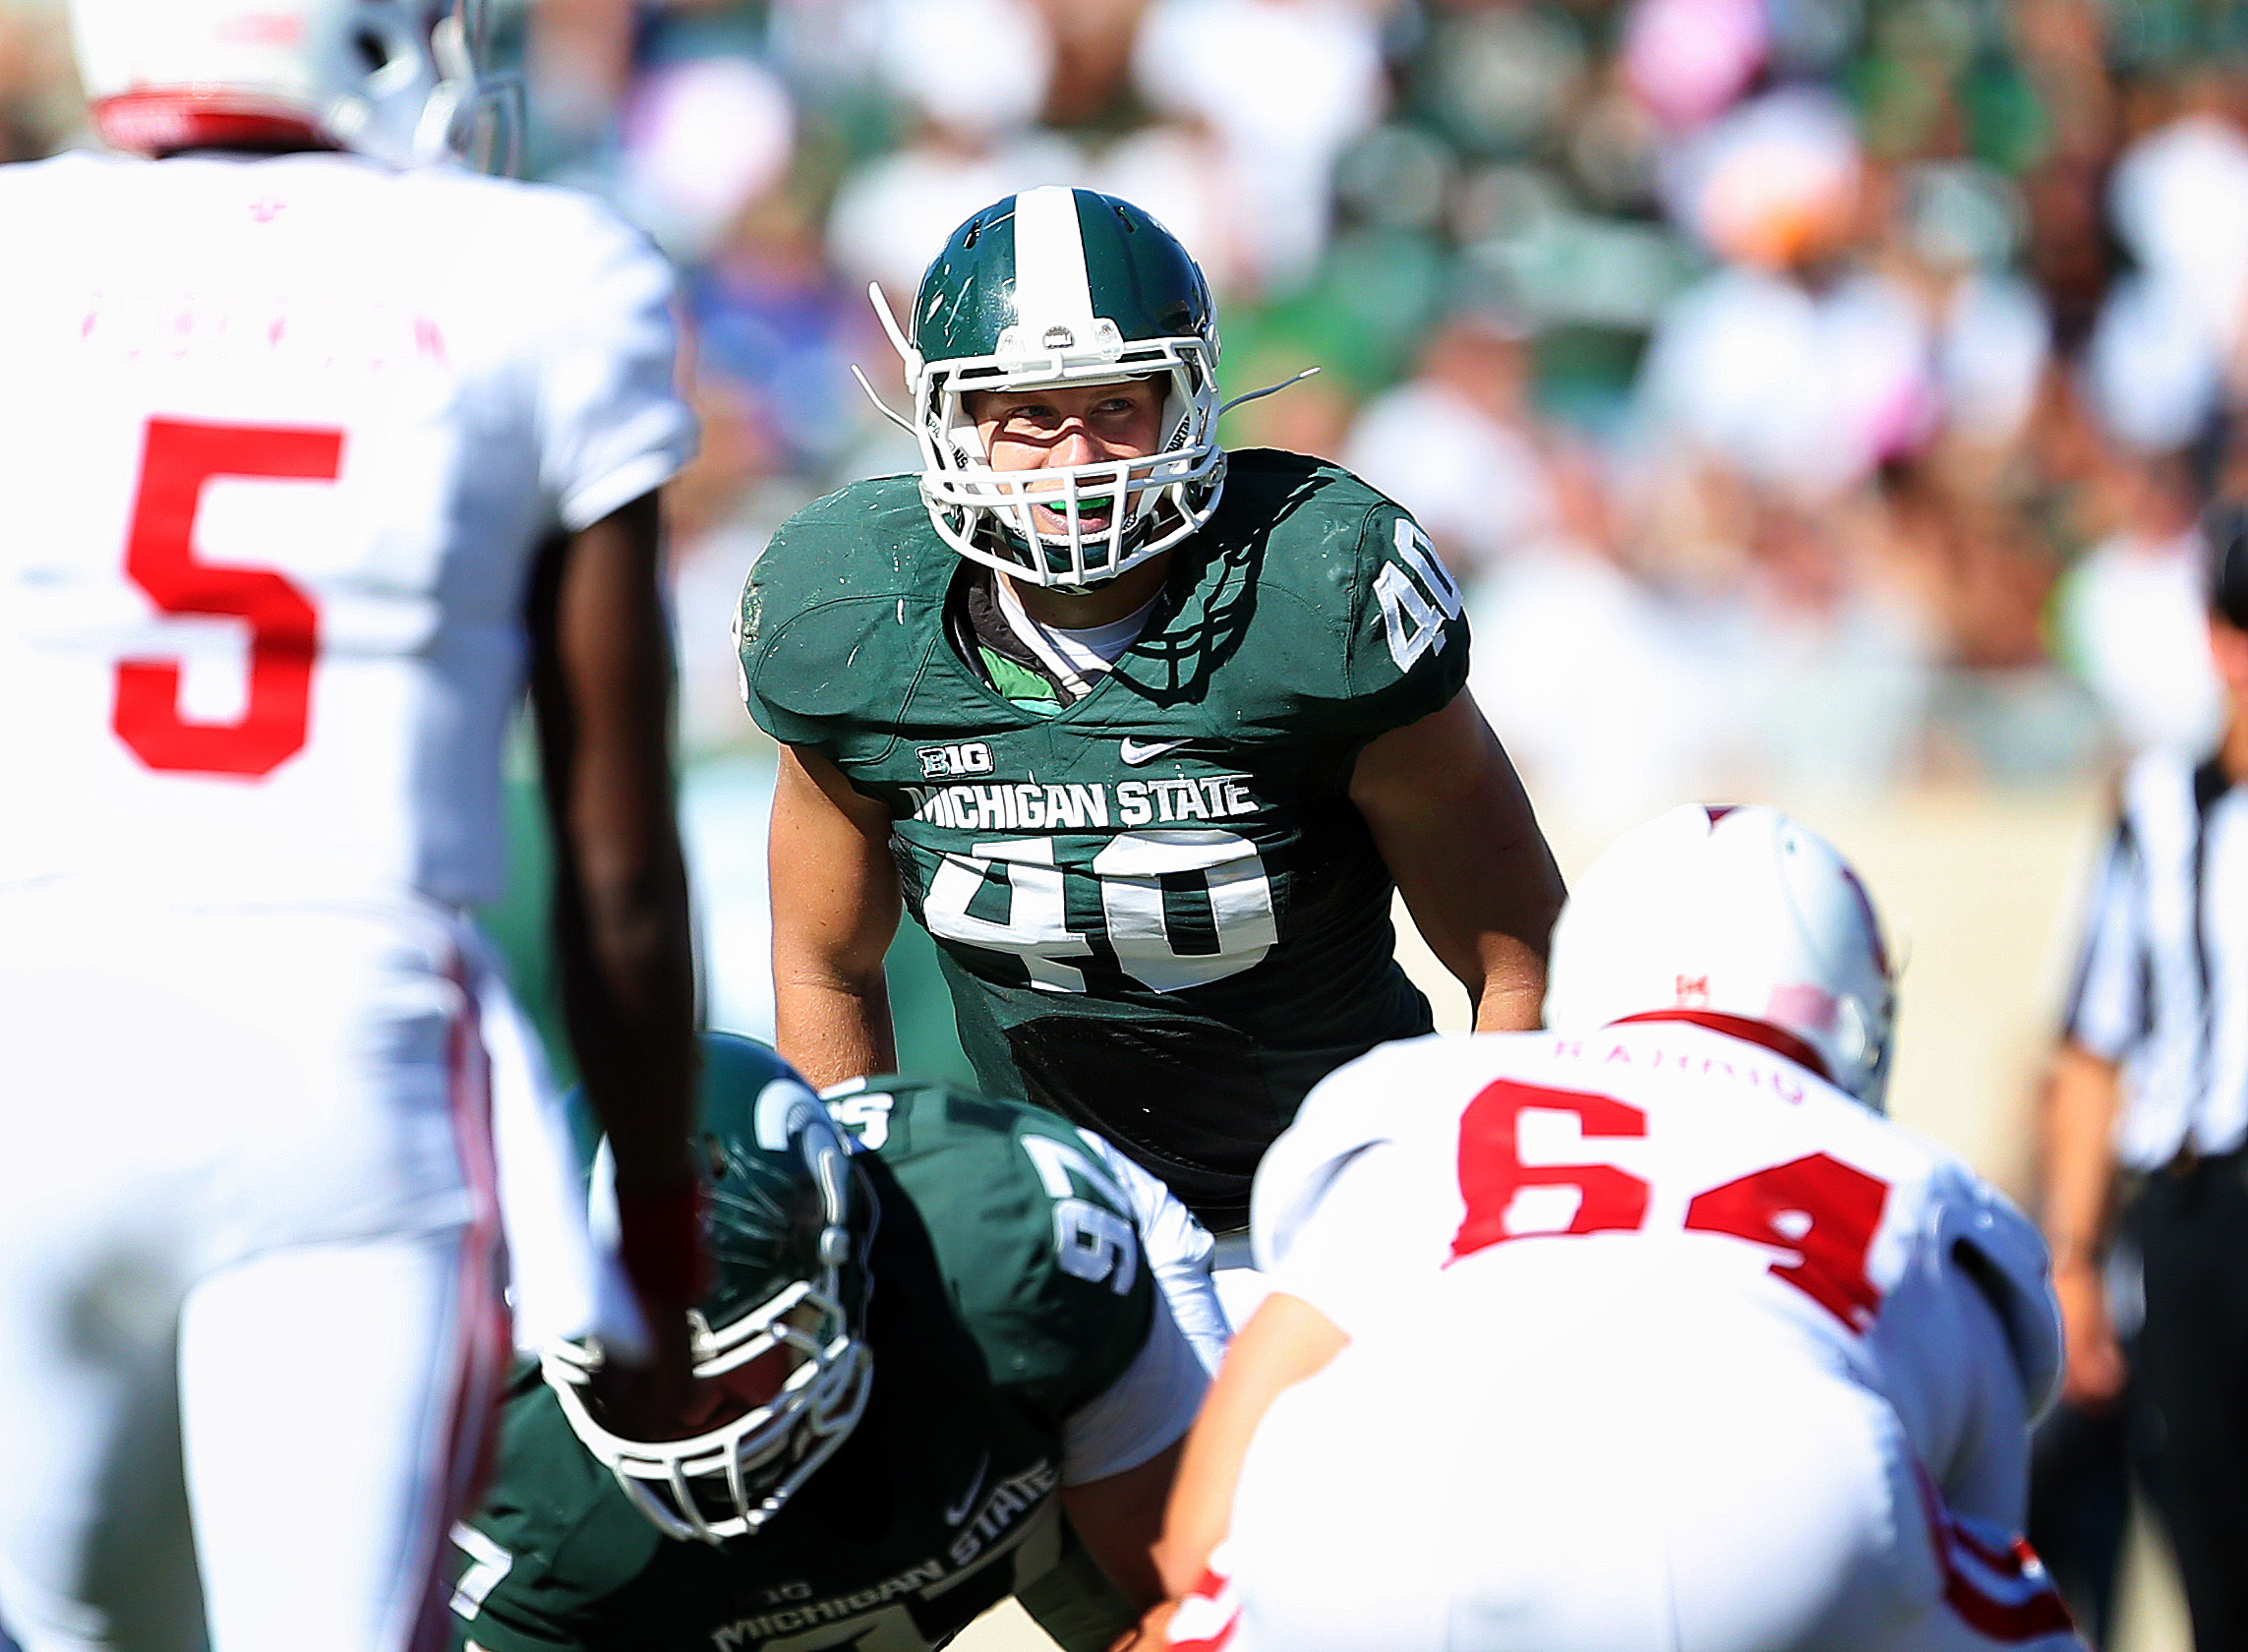 Max Bullough: Former Michigan State Star Lands New Coaching Job at Notre Dame